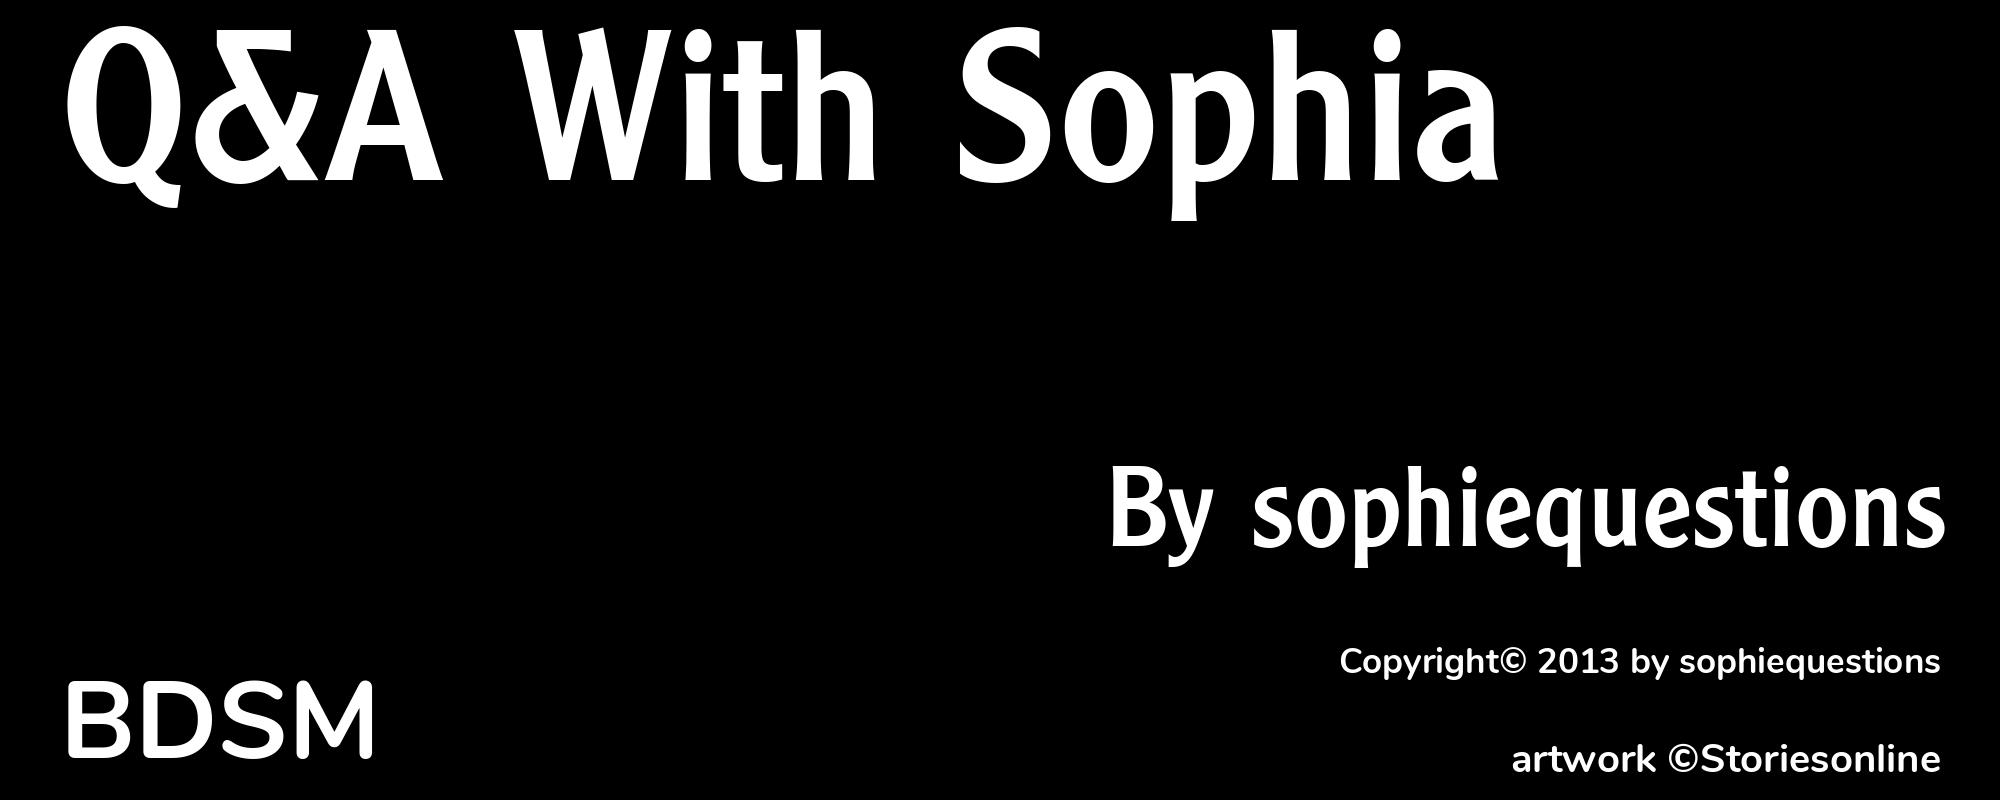 Q&A With Sophia - Cover